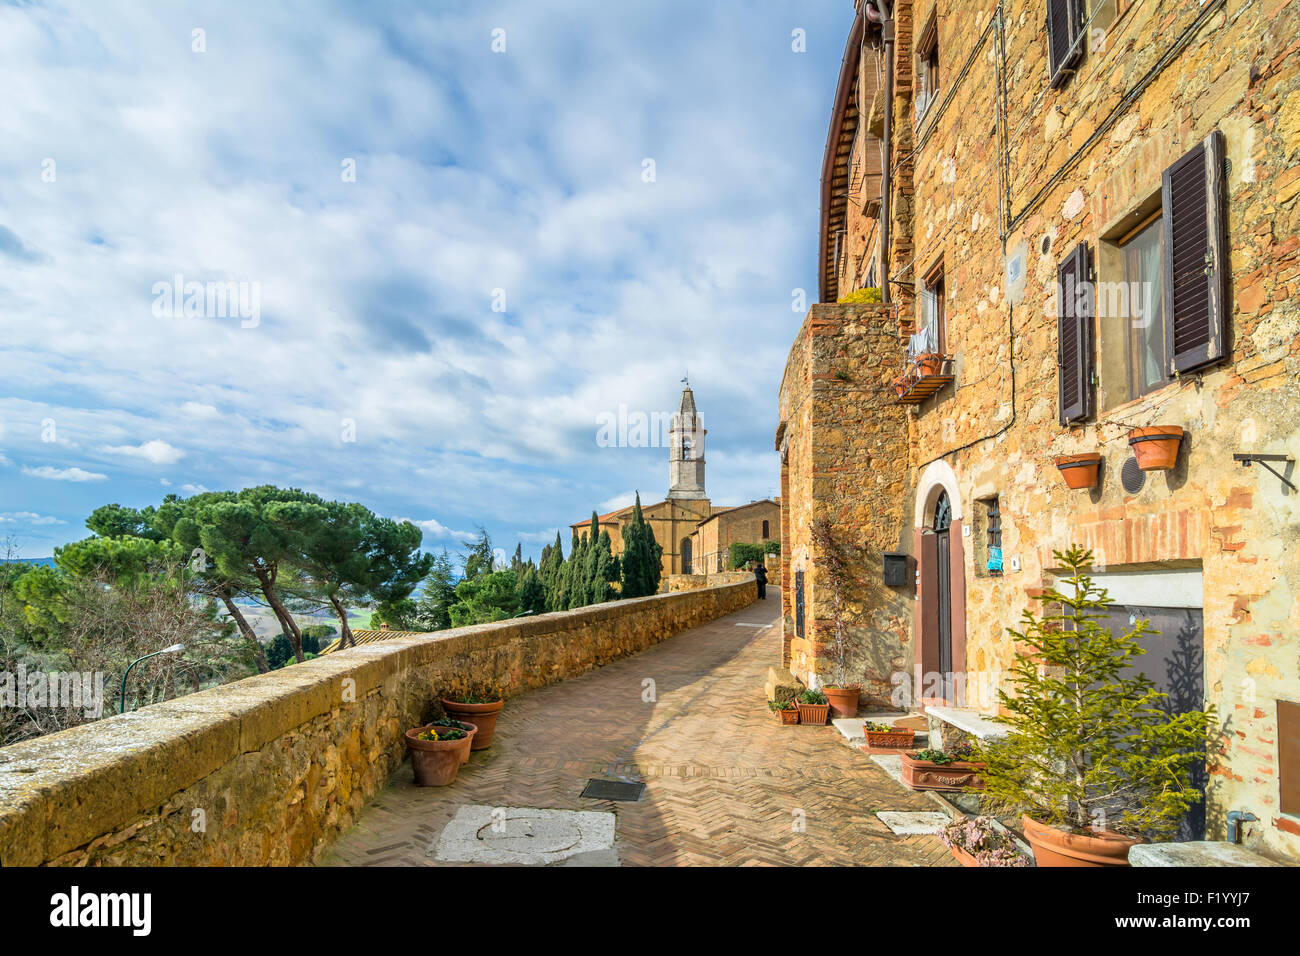 PIENZA, ITALY - January 25, 2015: street view of historic centre and Val d’Orcia valley in Pienza, Italy. Stock Photo